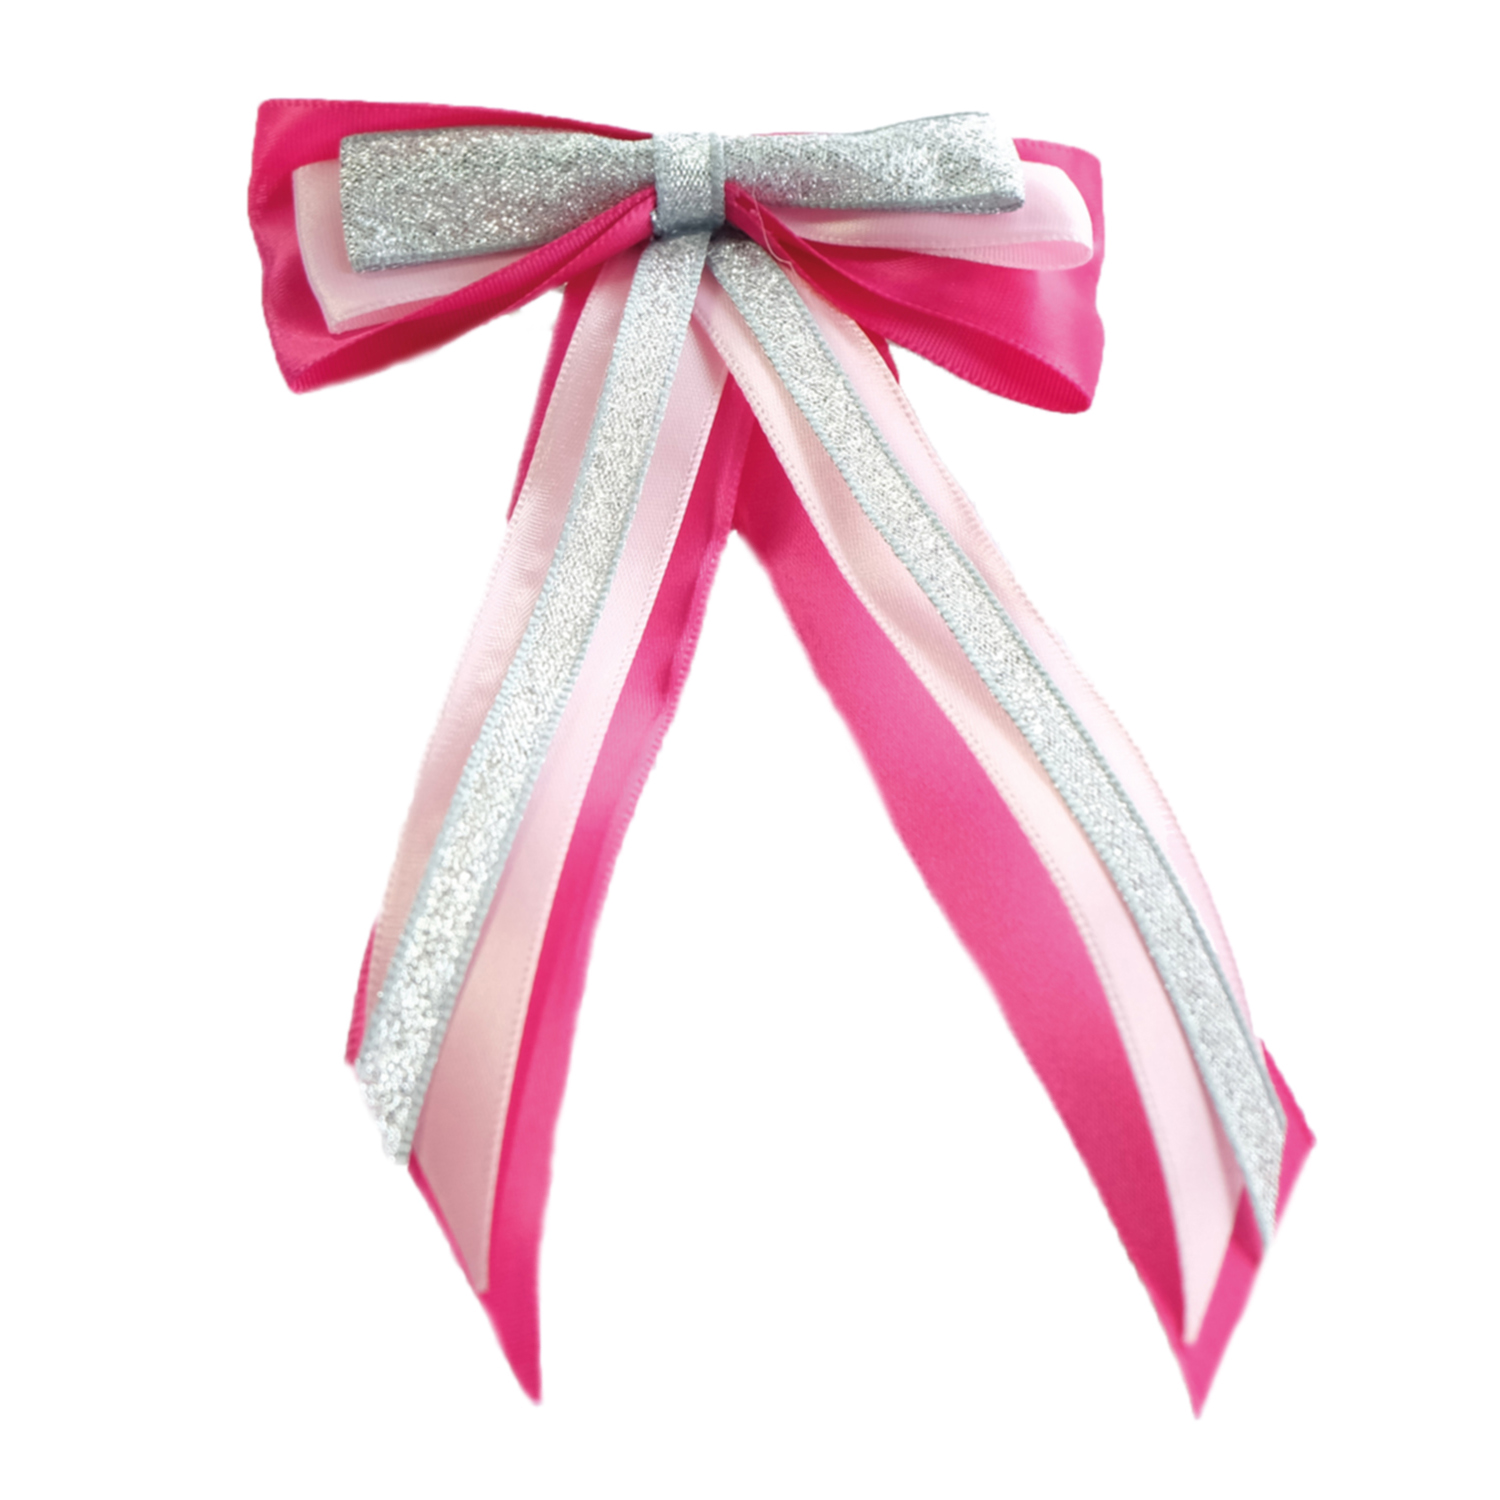 SHOWQUEST HAIRBOW & TAILS CERISE/PALE PINK/SILVER